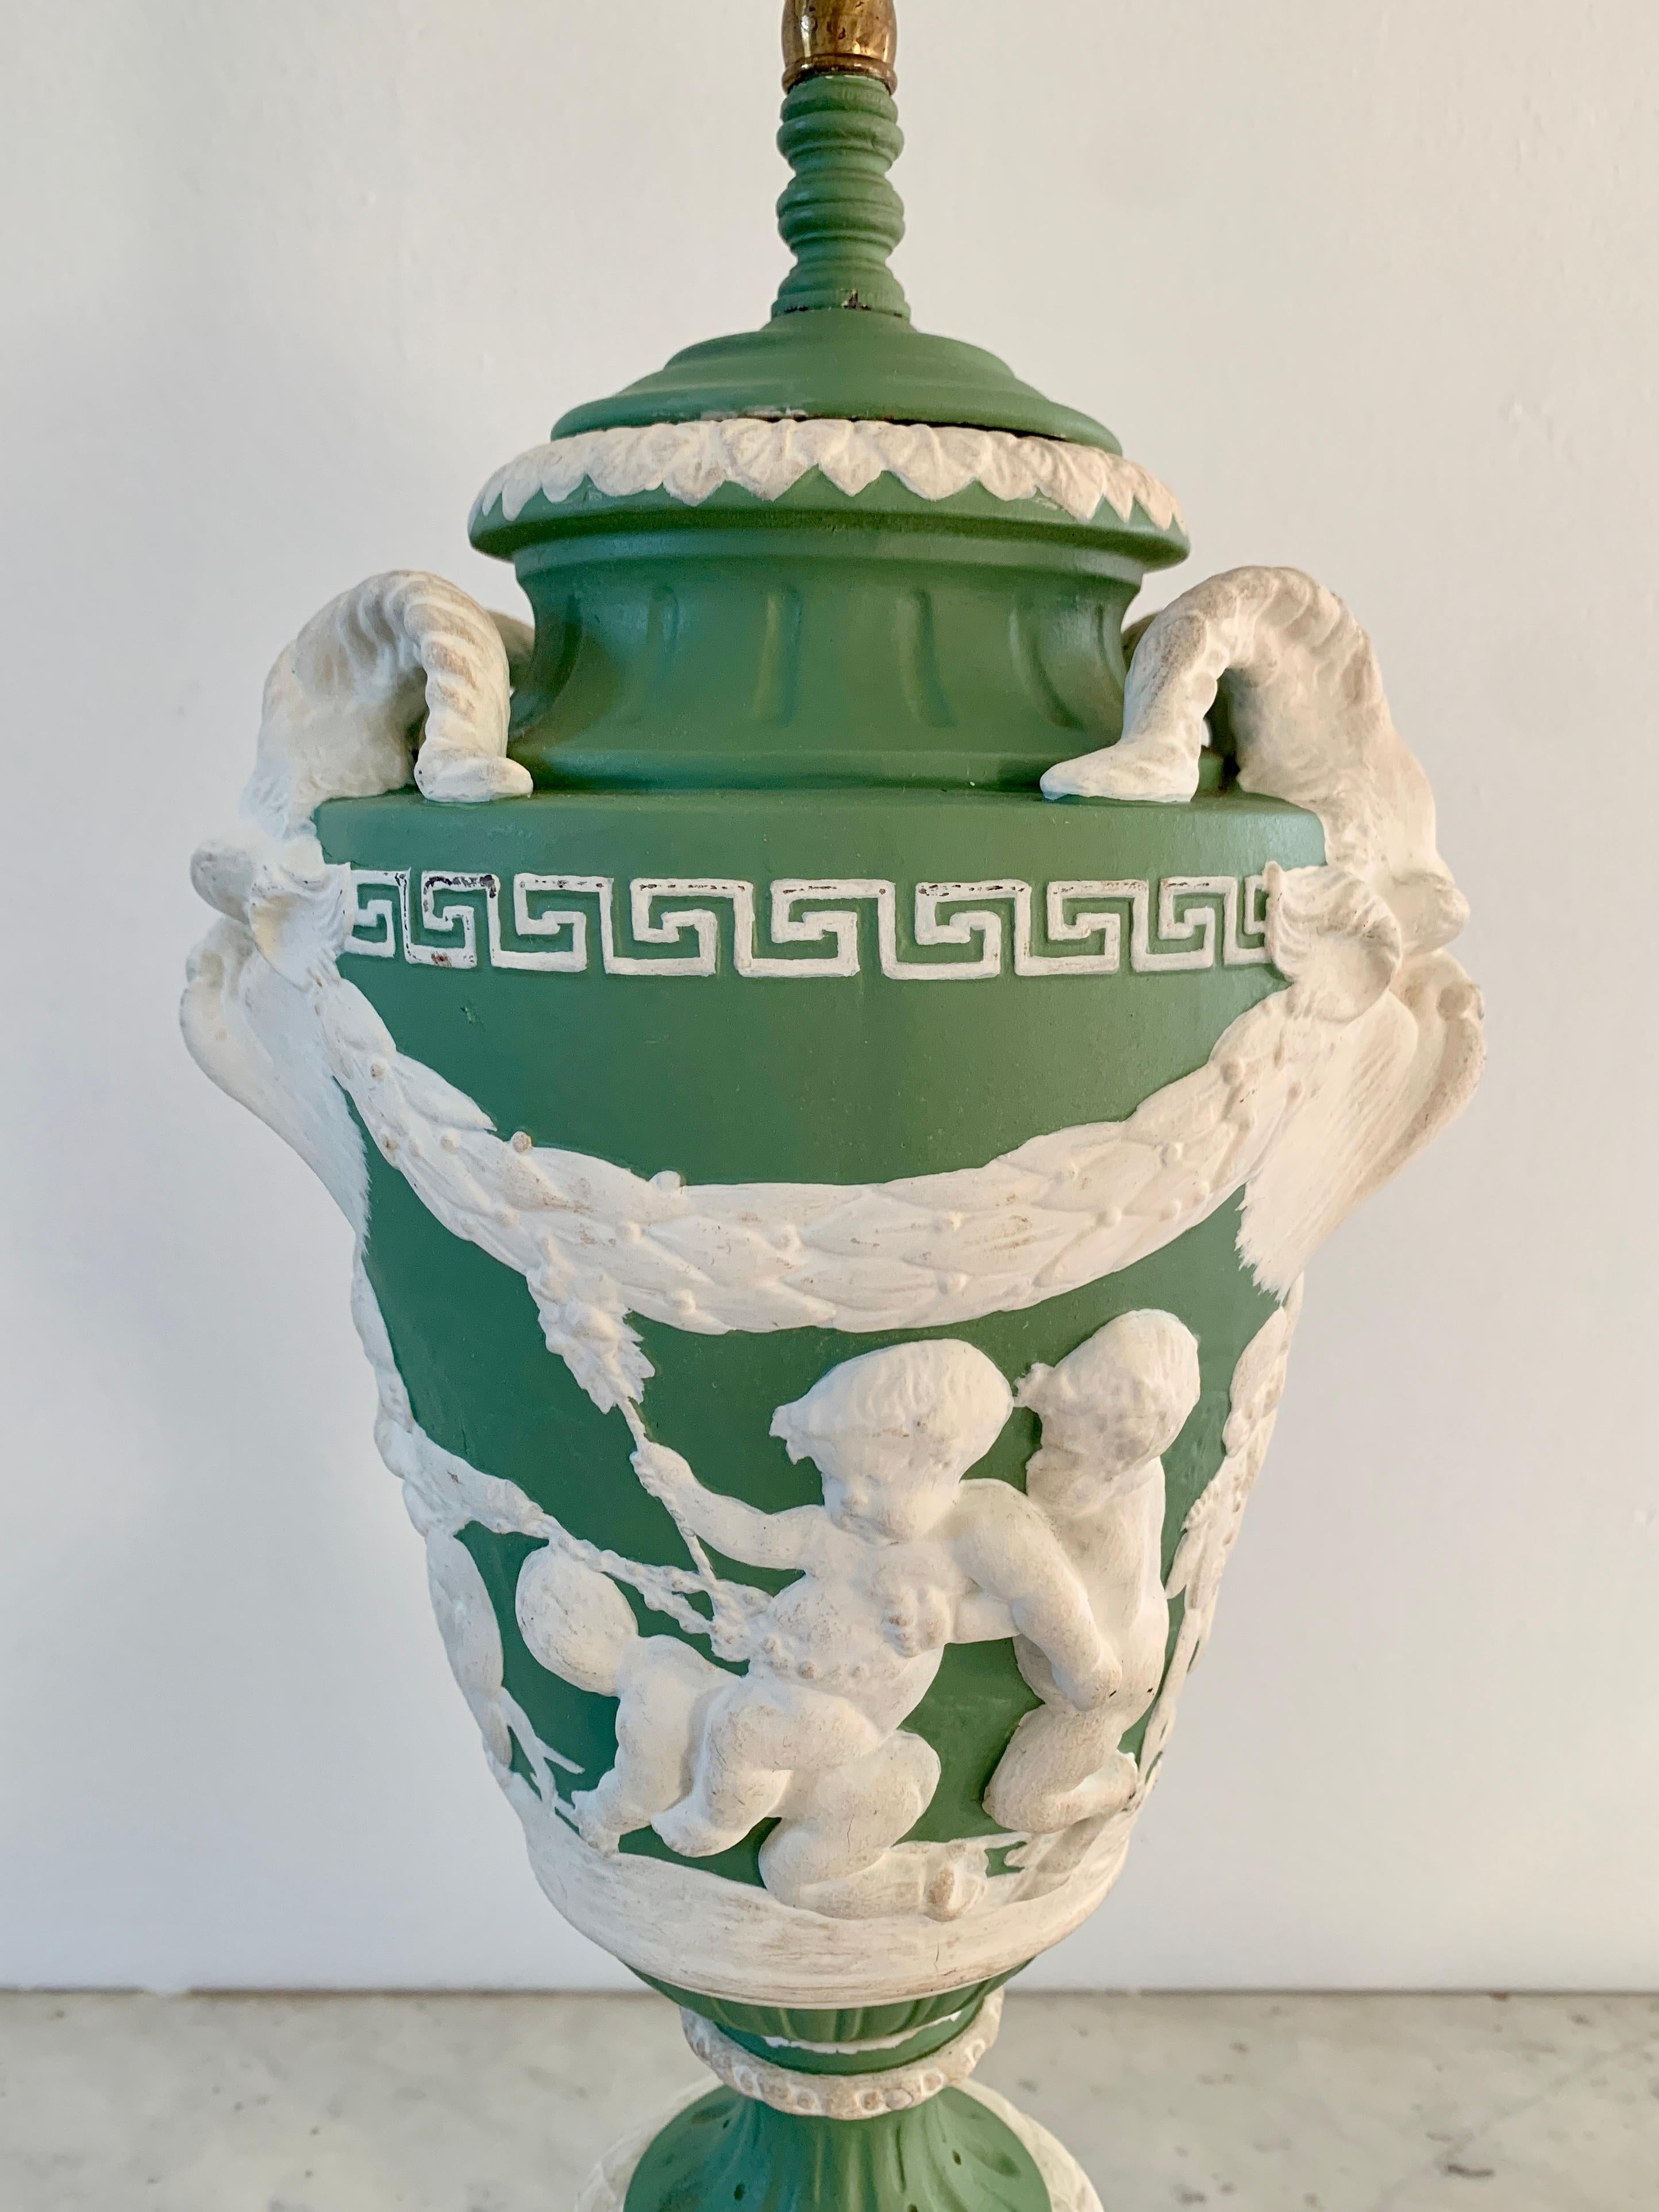 A gorgeous green & cream bisque Neoclassical style table lamp with mythological creatures, ram's horns, putti, and a Greek Key border

By Wedgwood

USA, circa 1920s

Measures: 8